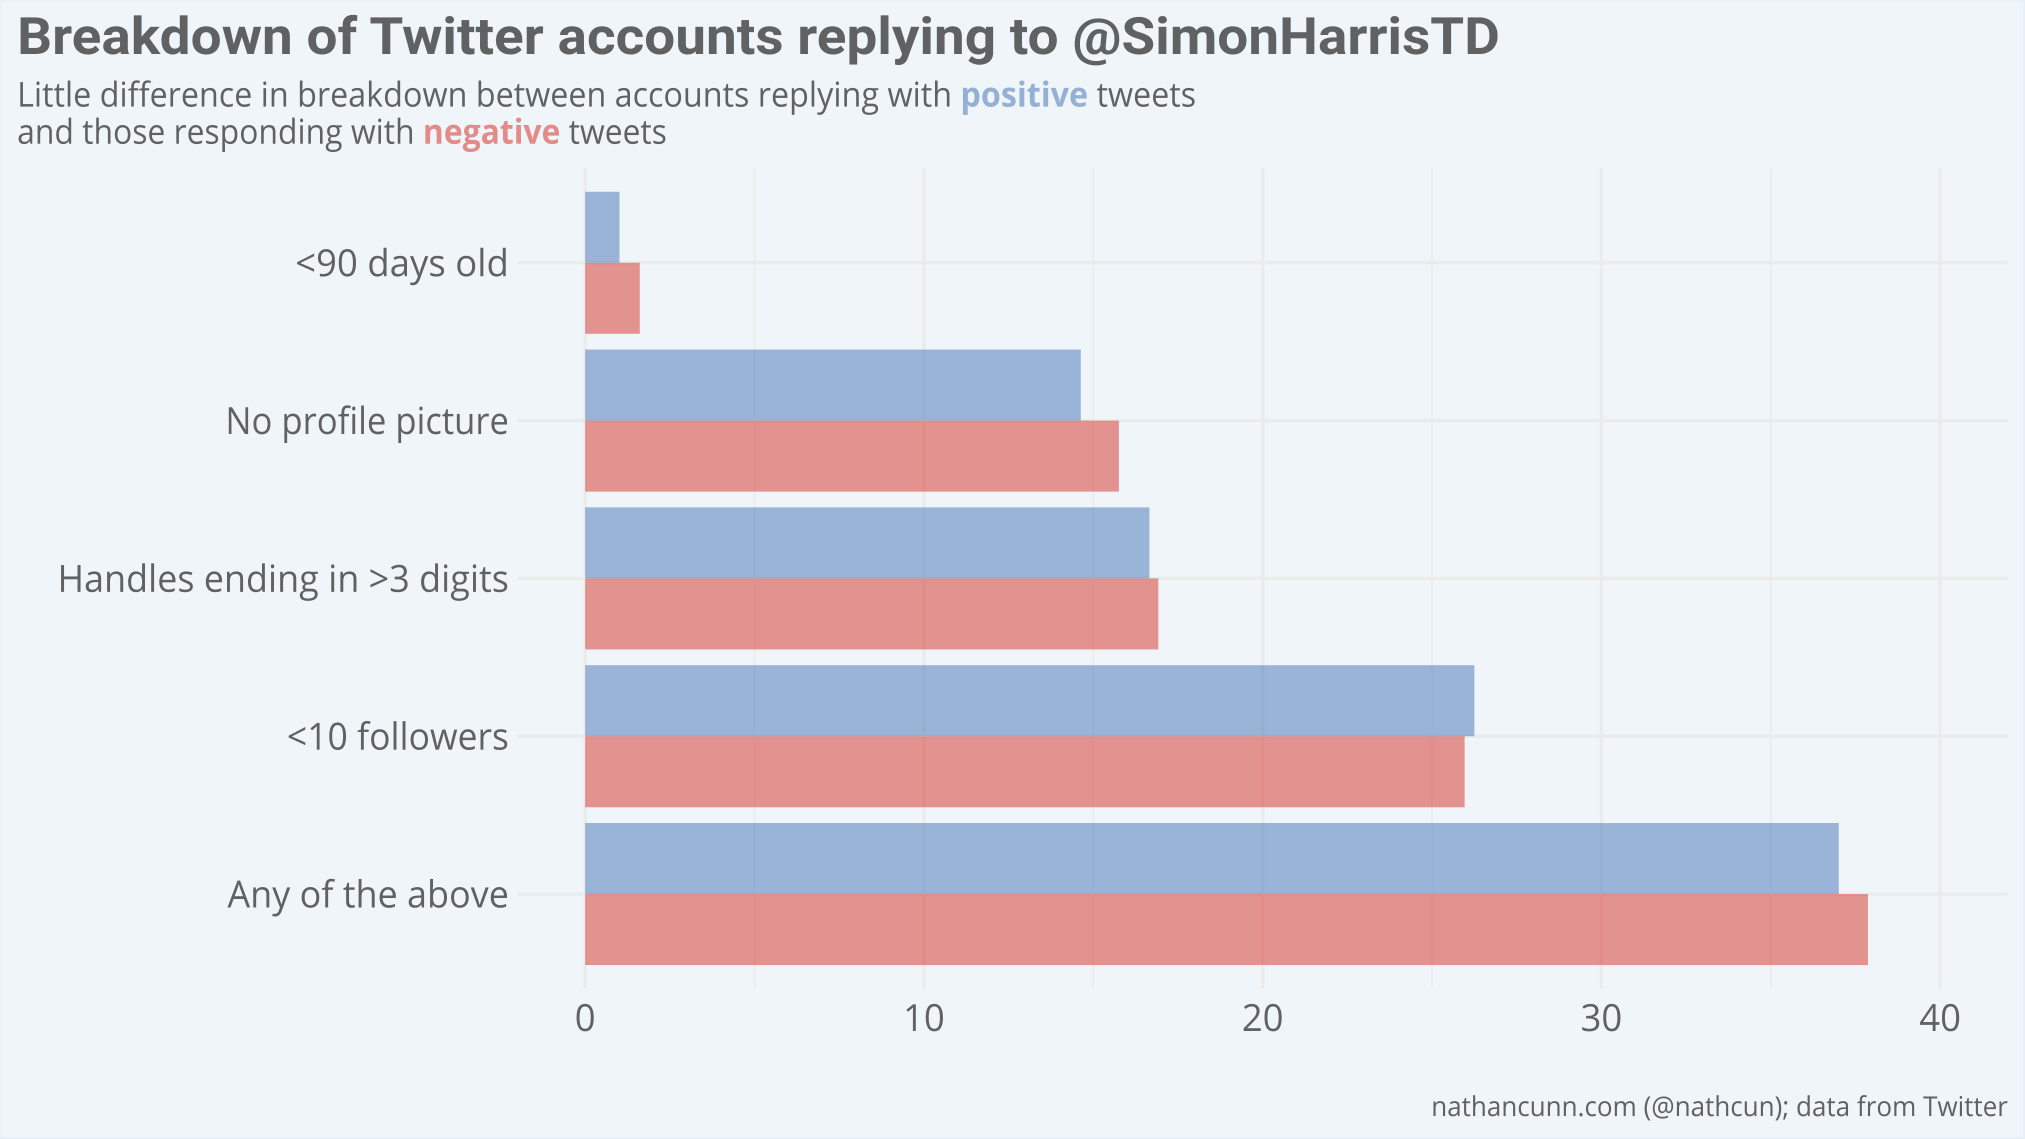 Bar chart of proportion of positive and negative tweets replying to @SimonHarrisTD for accounts meeting different bot criteria, showing the supposed bots are as likely to be positive towards @SimonHarrisTD as they are to be negative.